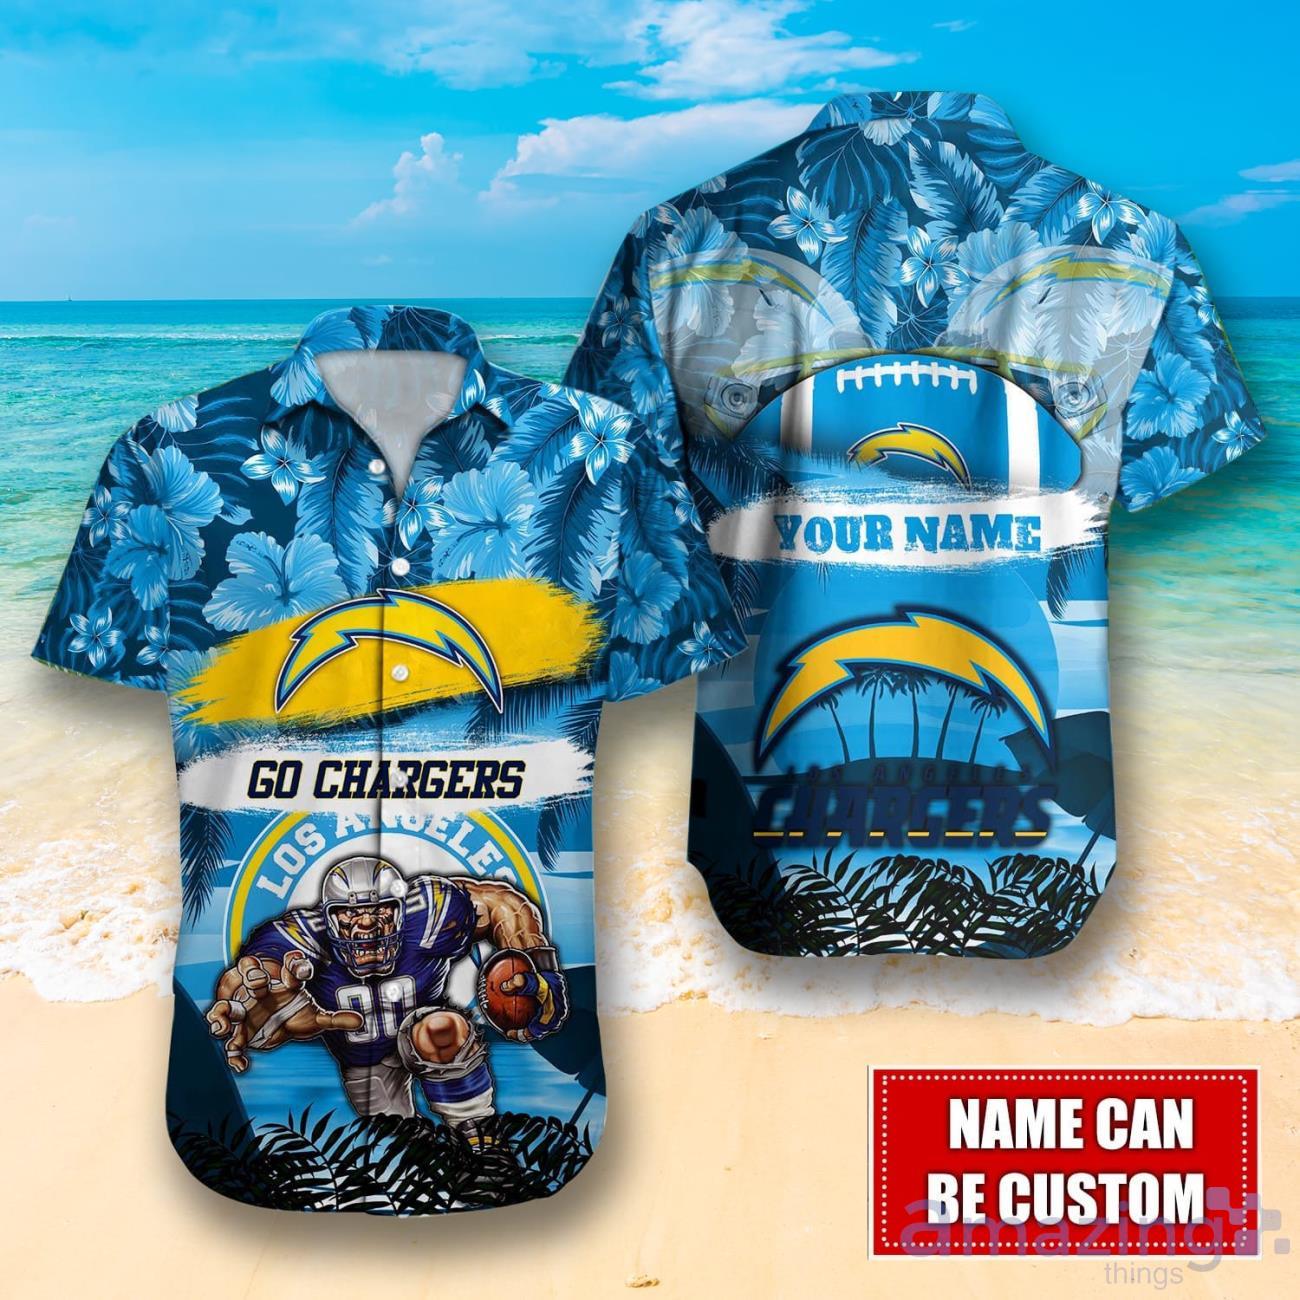 Los Angeles Chargers Apparel, Gifts, Chargers Merchandise, Los Angeles  Chargers Gear